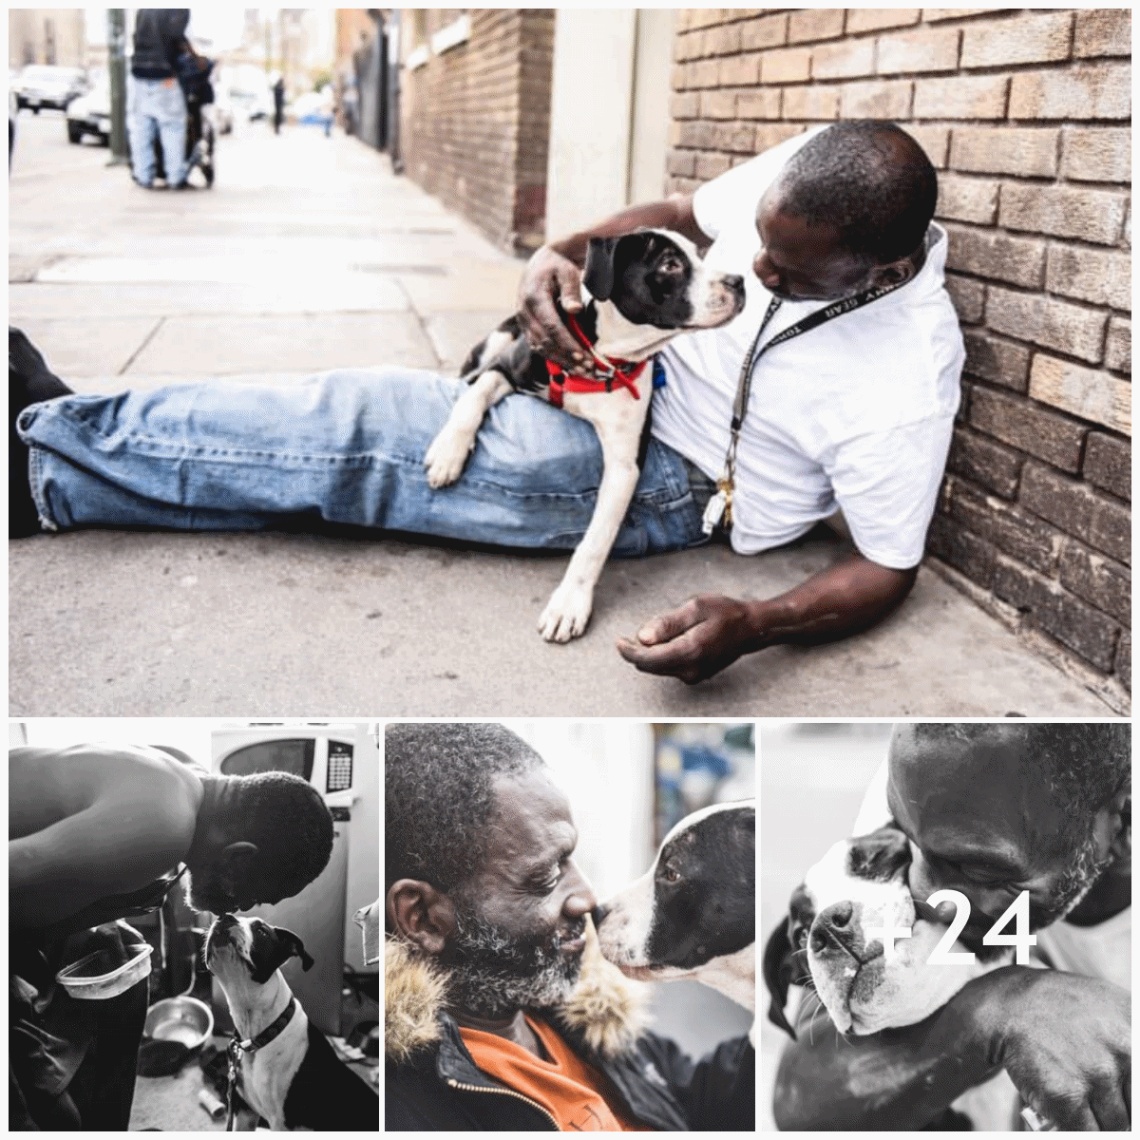 A homeless man shares his life with a dog he met on the streets who ends up being his lifelong best friend.